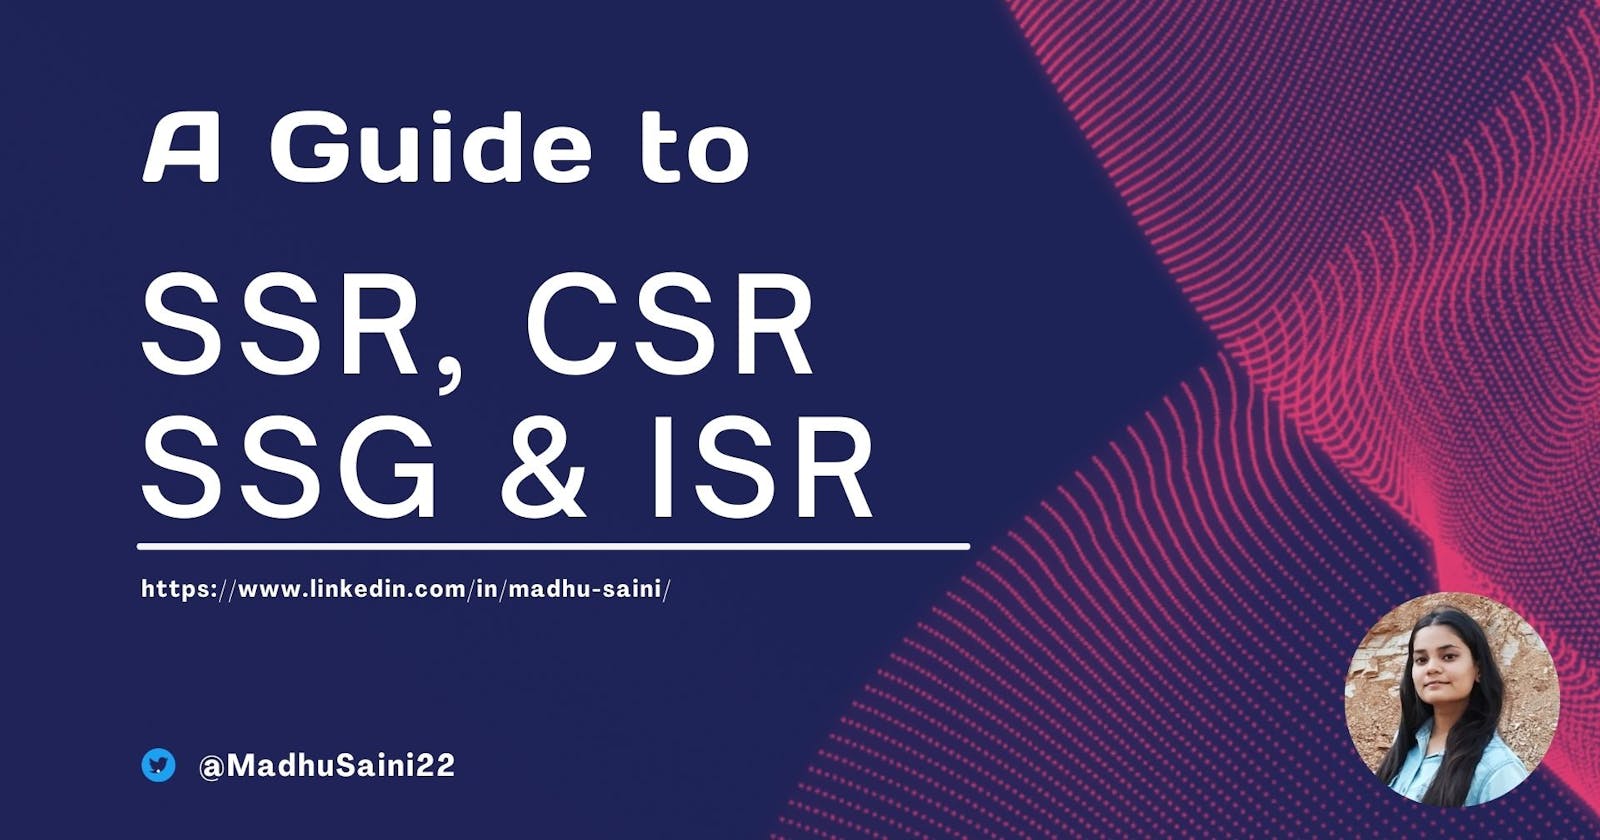 A Guide to SSR, CSR, SSG and ISR